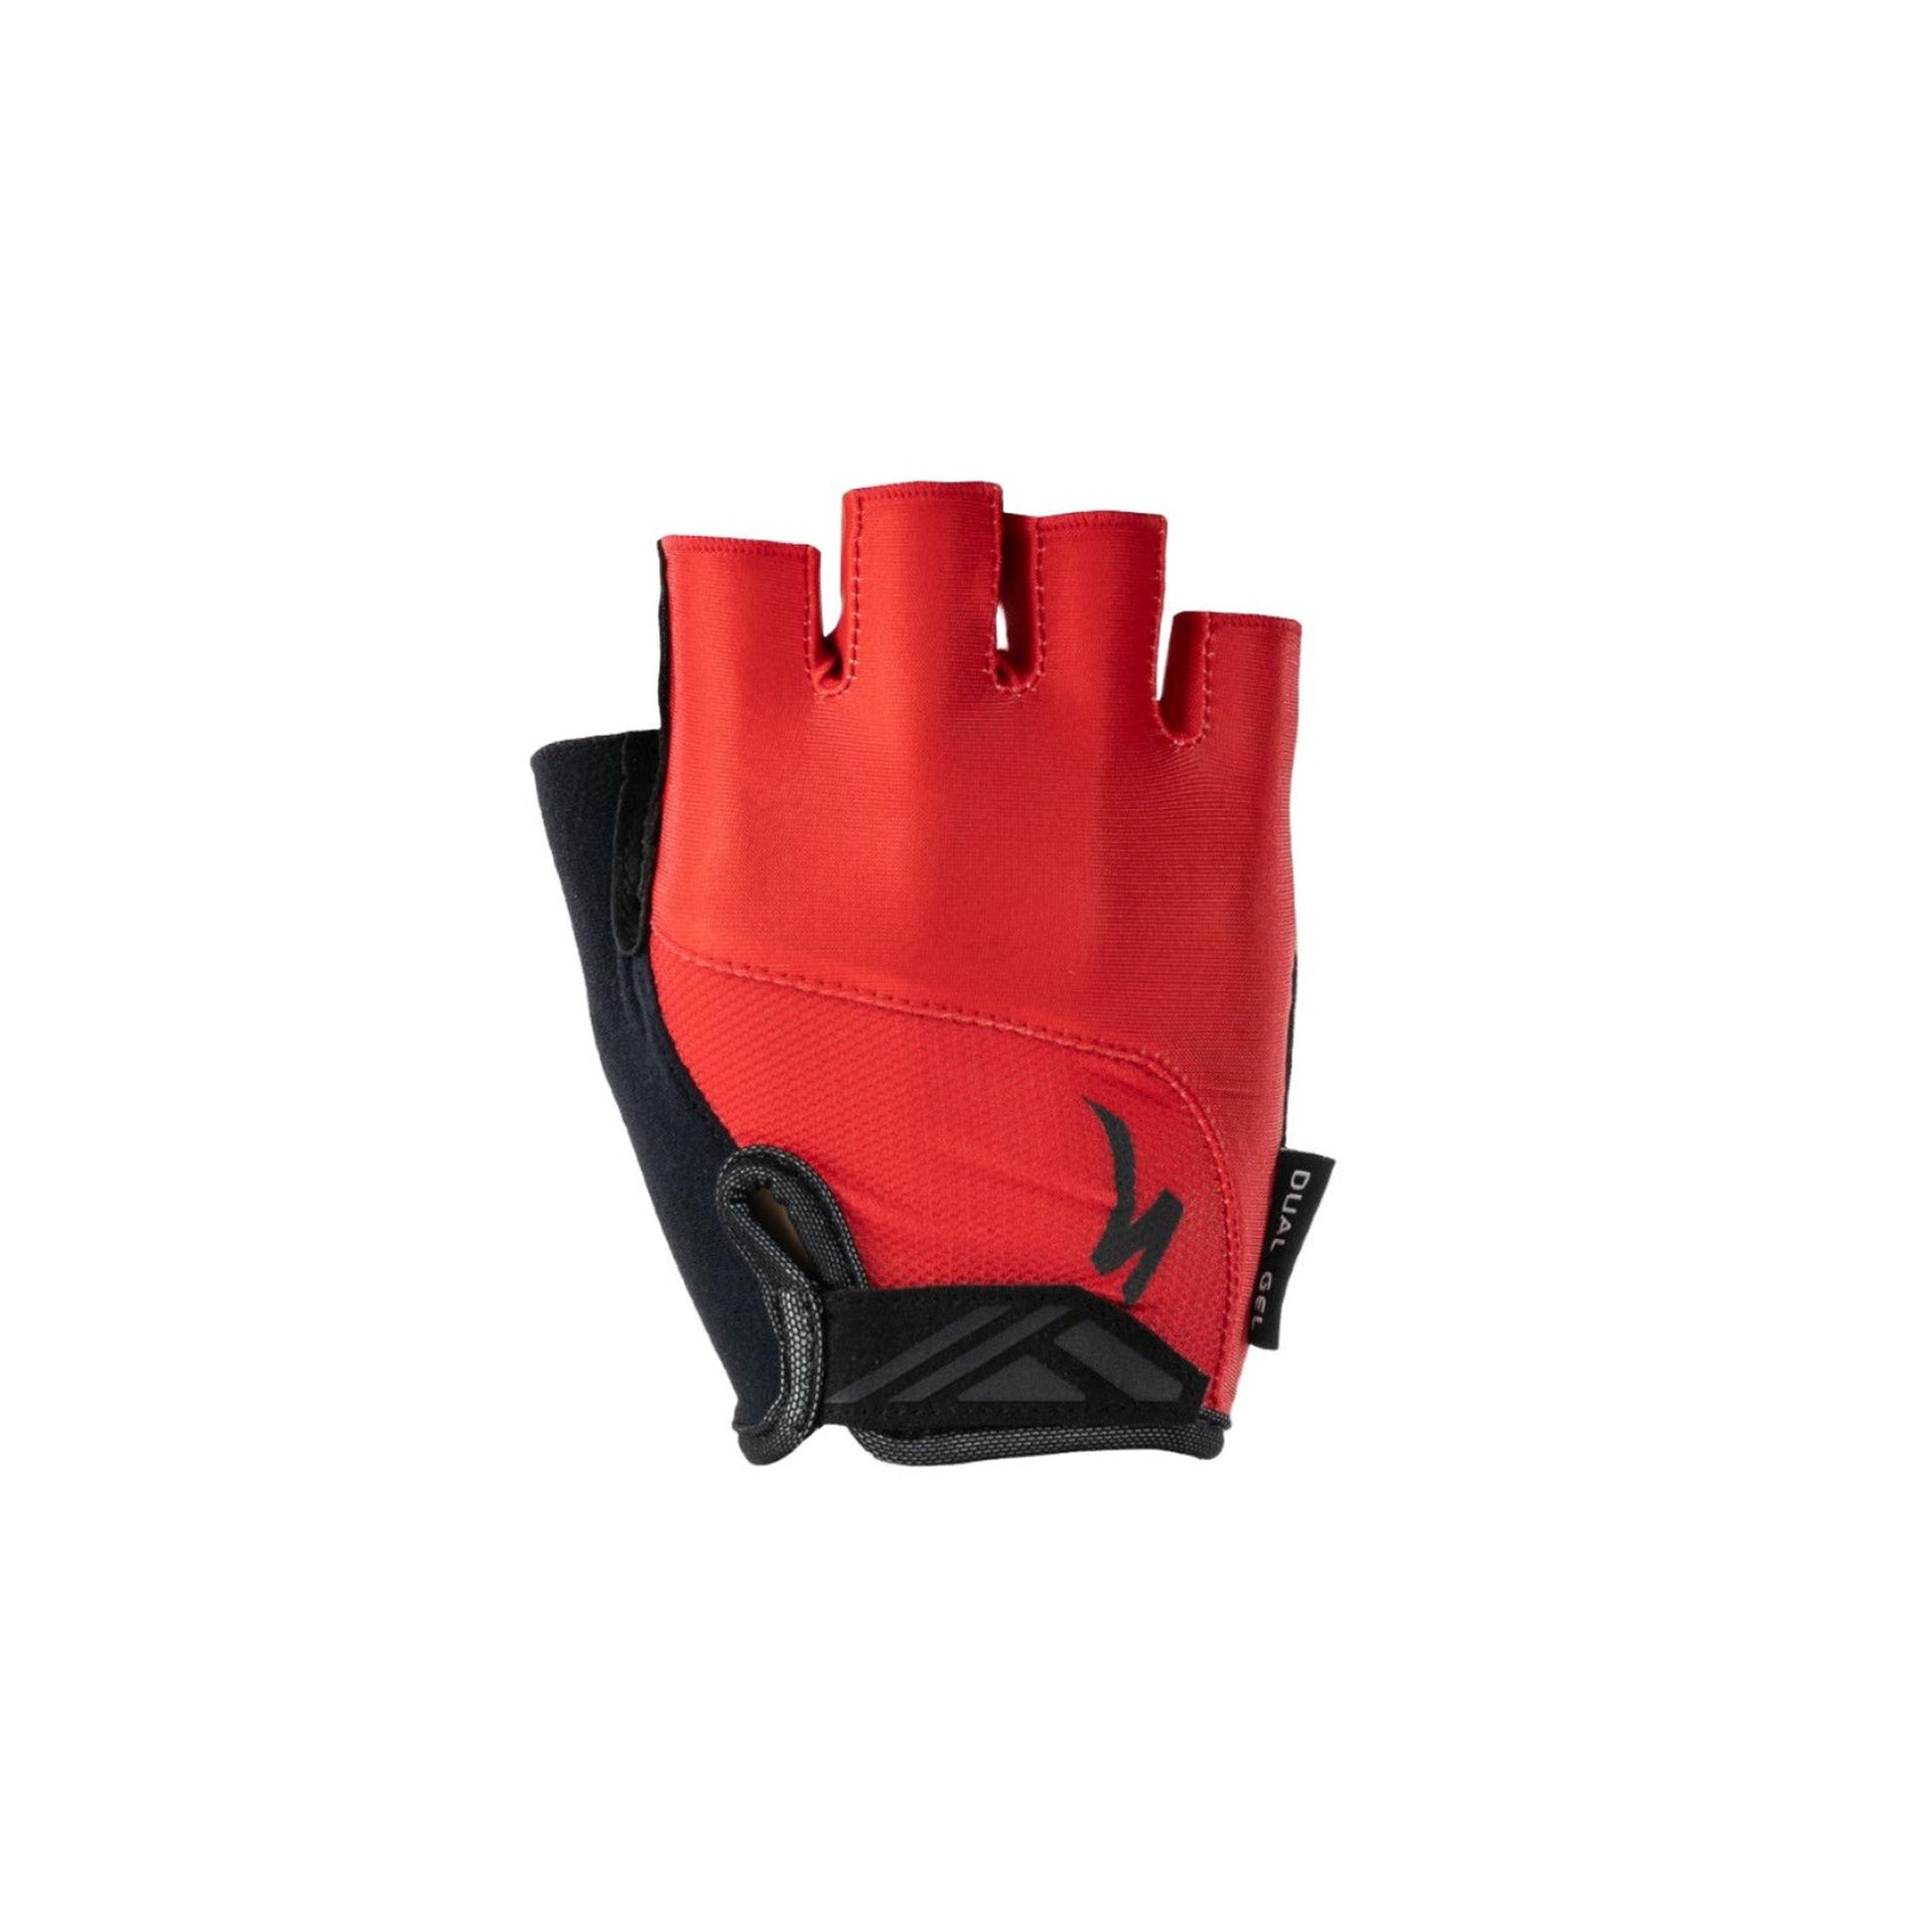 Men's Body Geometry Dual-Gel Short Finger Gloves | Complete Cyclist - Our Body Geometry Dual-Gel gloves are all about comfort. They feature strategically placed gel pads throughout the palm to alleviate hand fatigue by relieving